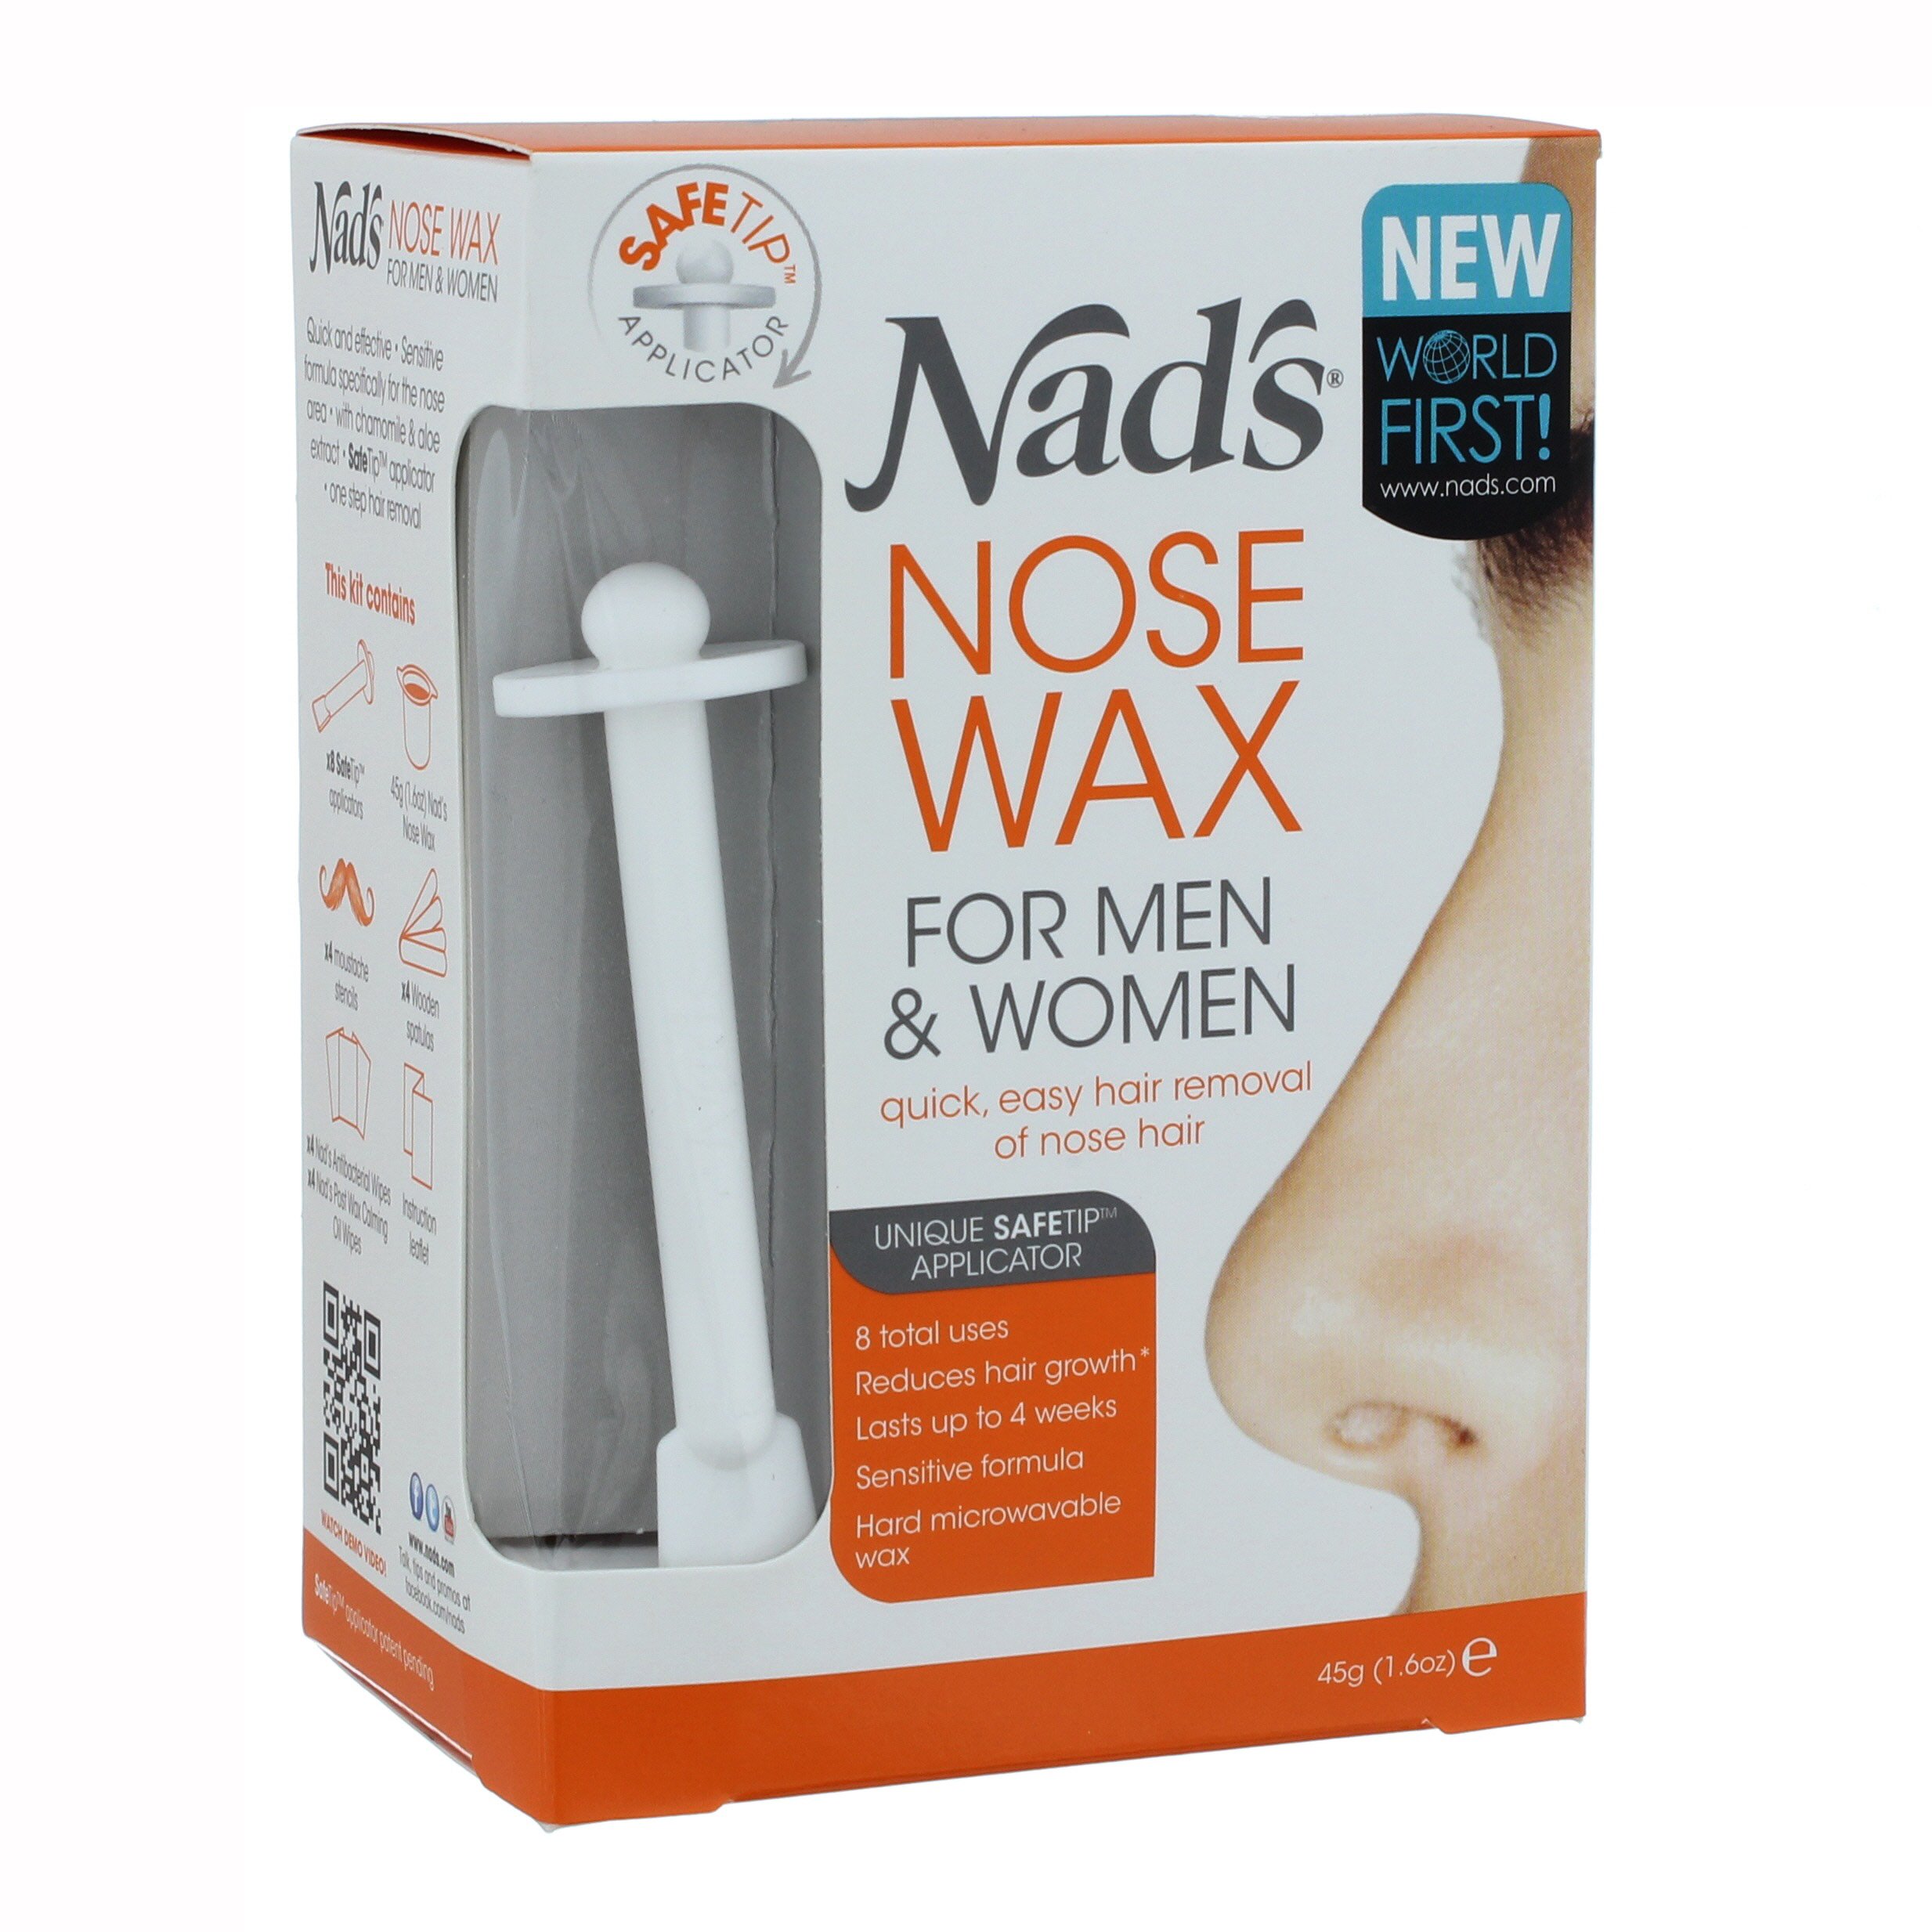 Nad's Hair Removal Nose Wax Kit for Men & Women